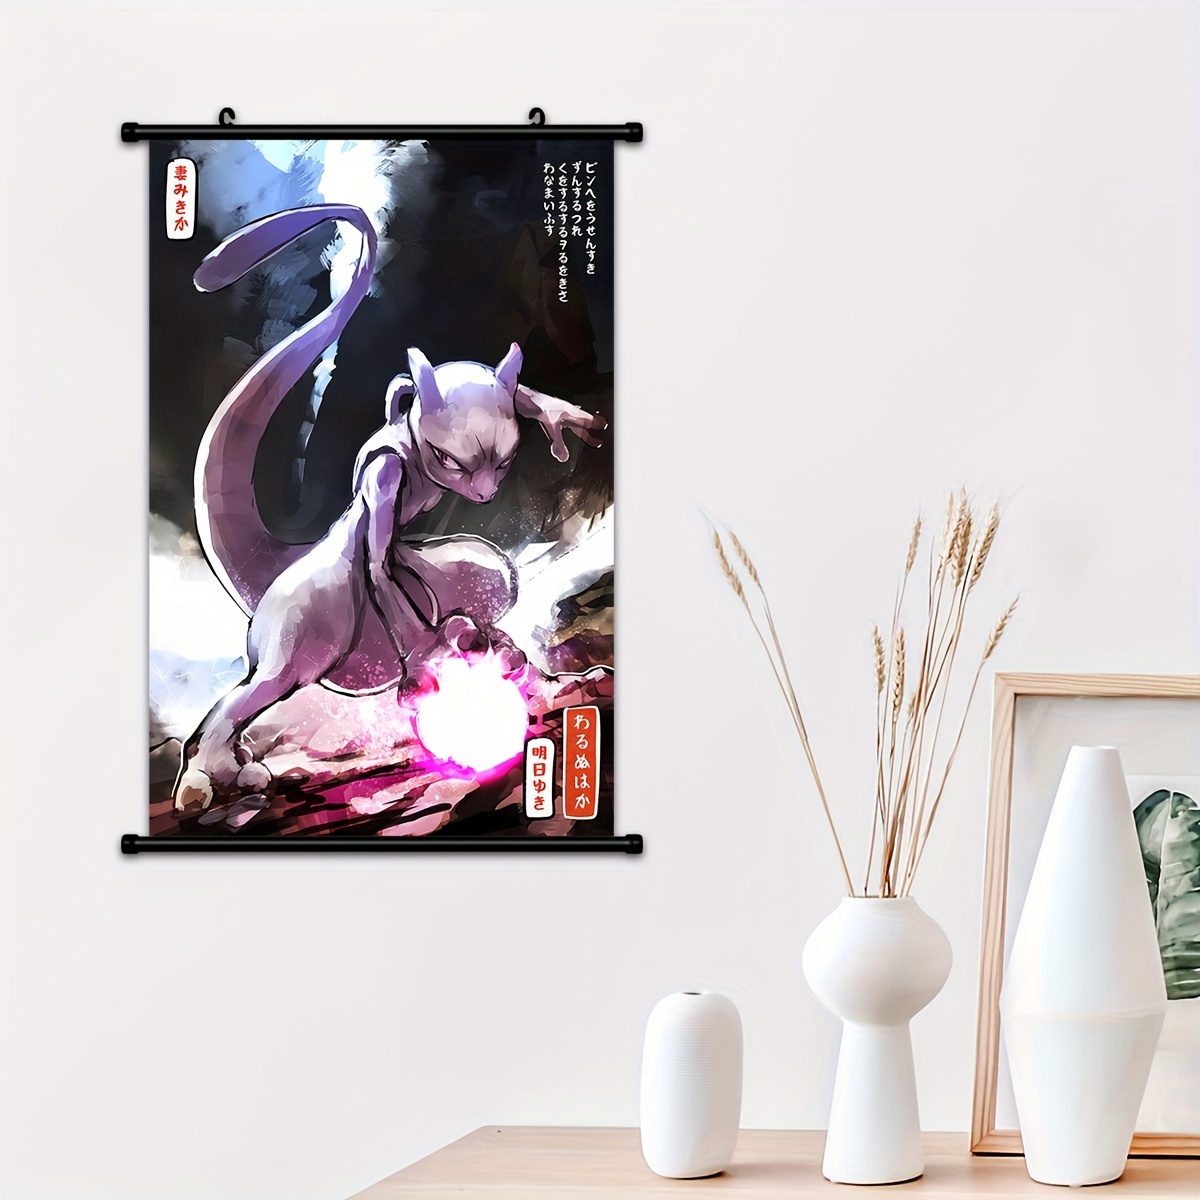 Anime Pokemon Peripherals Roles Pikachu Canvas Painting Eevee Mewtwo Poster  Wall Art Comic Kawaii Picture for